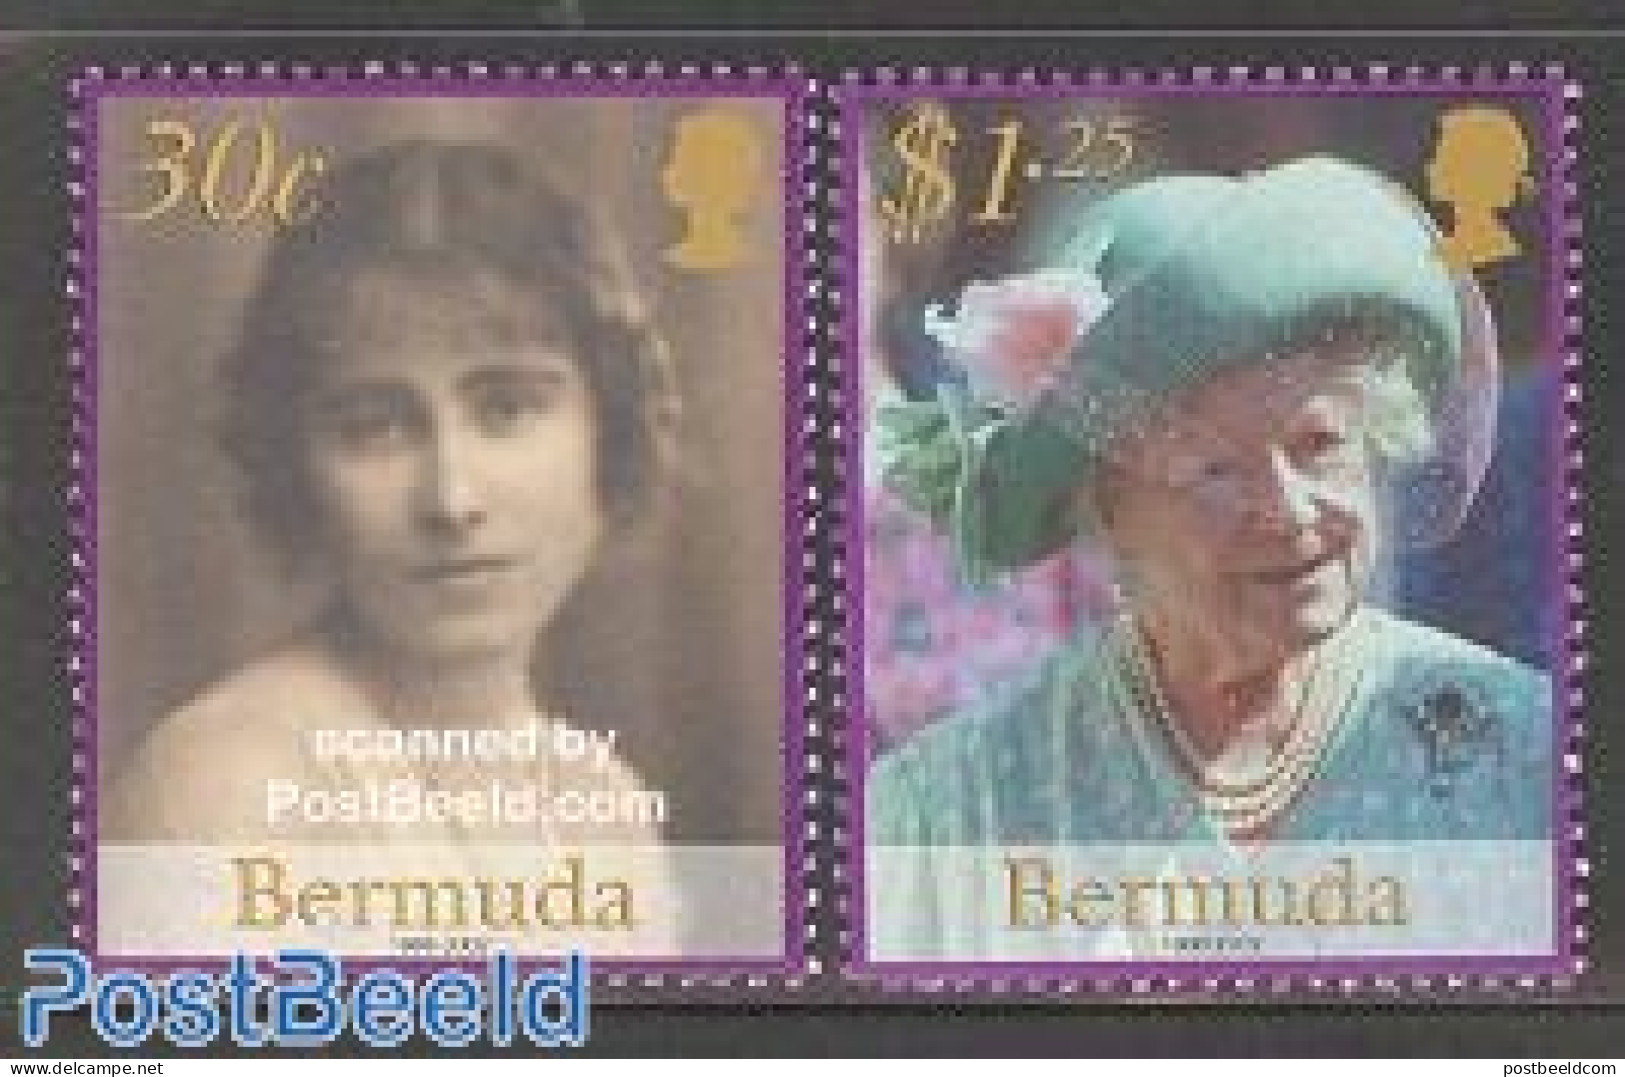 Bermuda 2002 Queen Mother 2v, Mint NH, History - Kings & Queens (Royalty) - Familias Reales